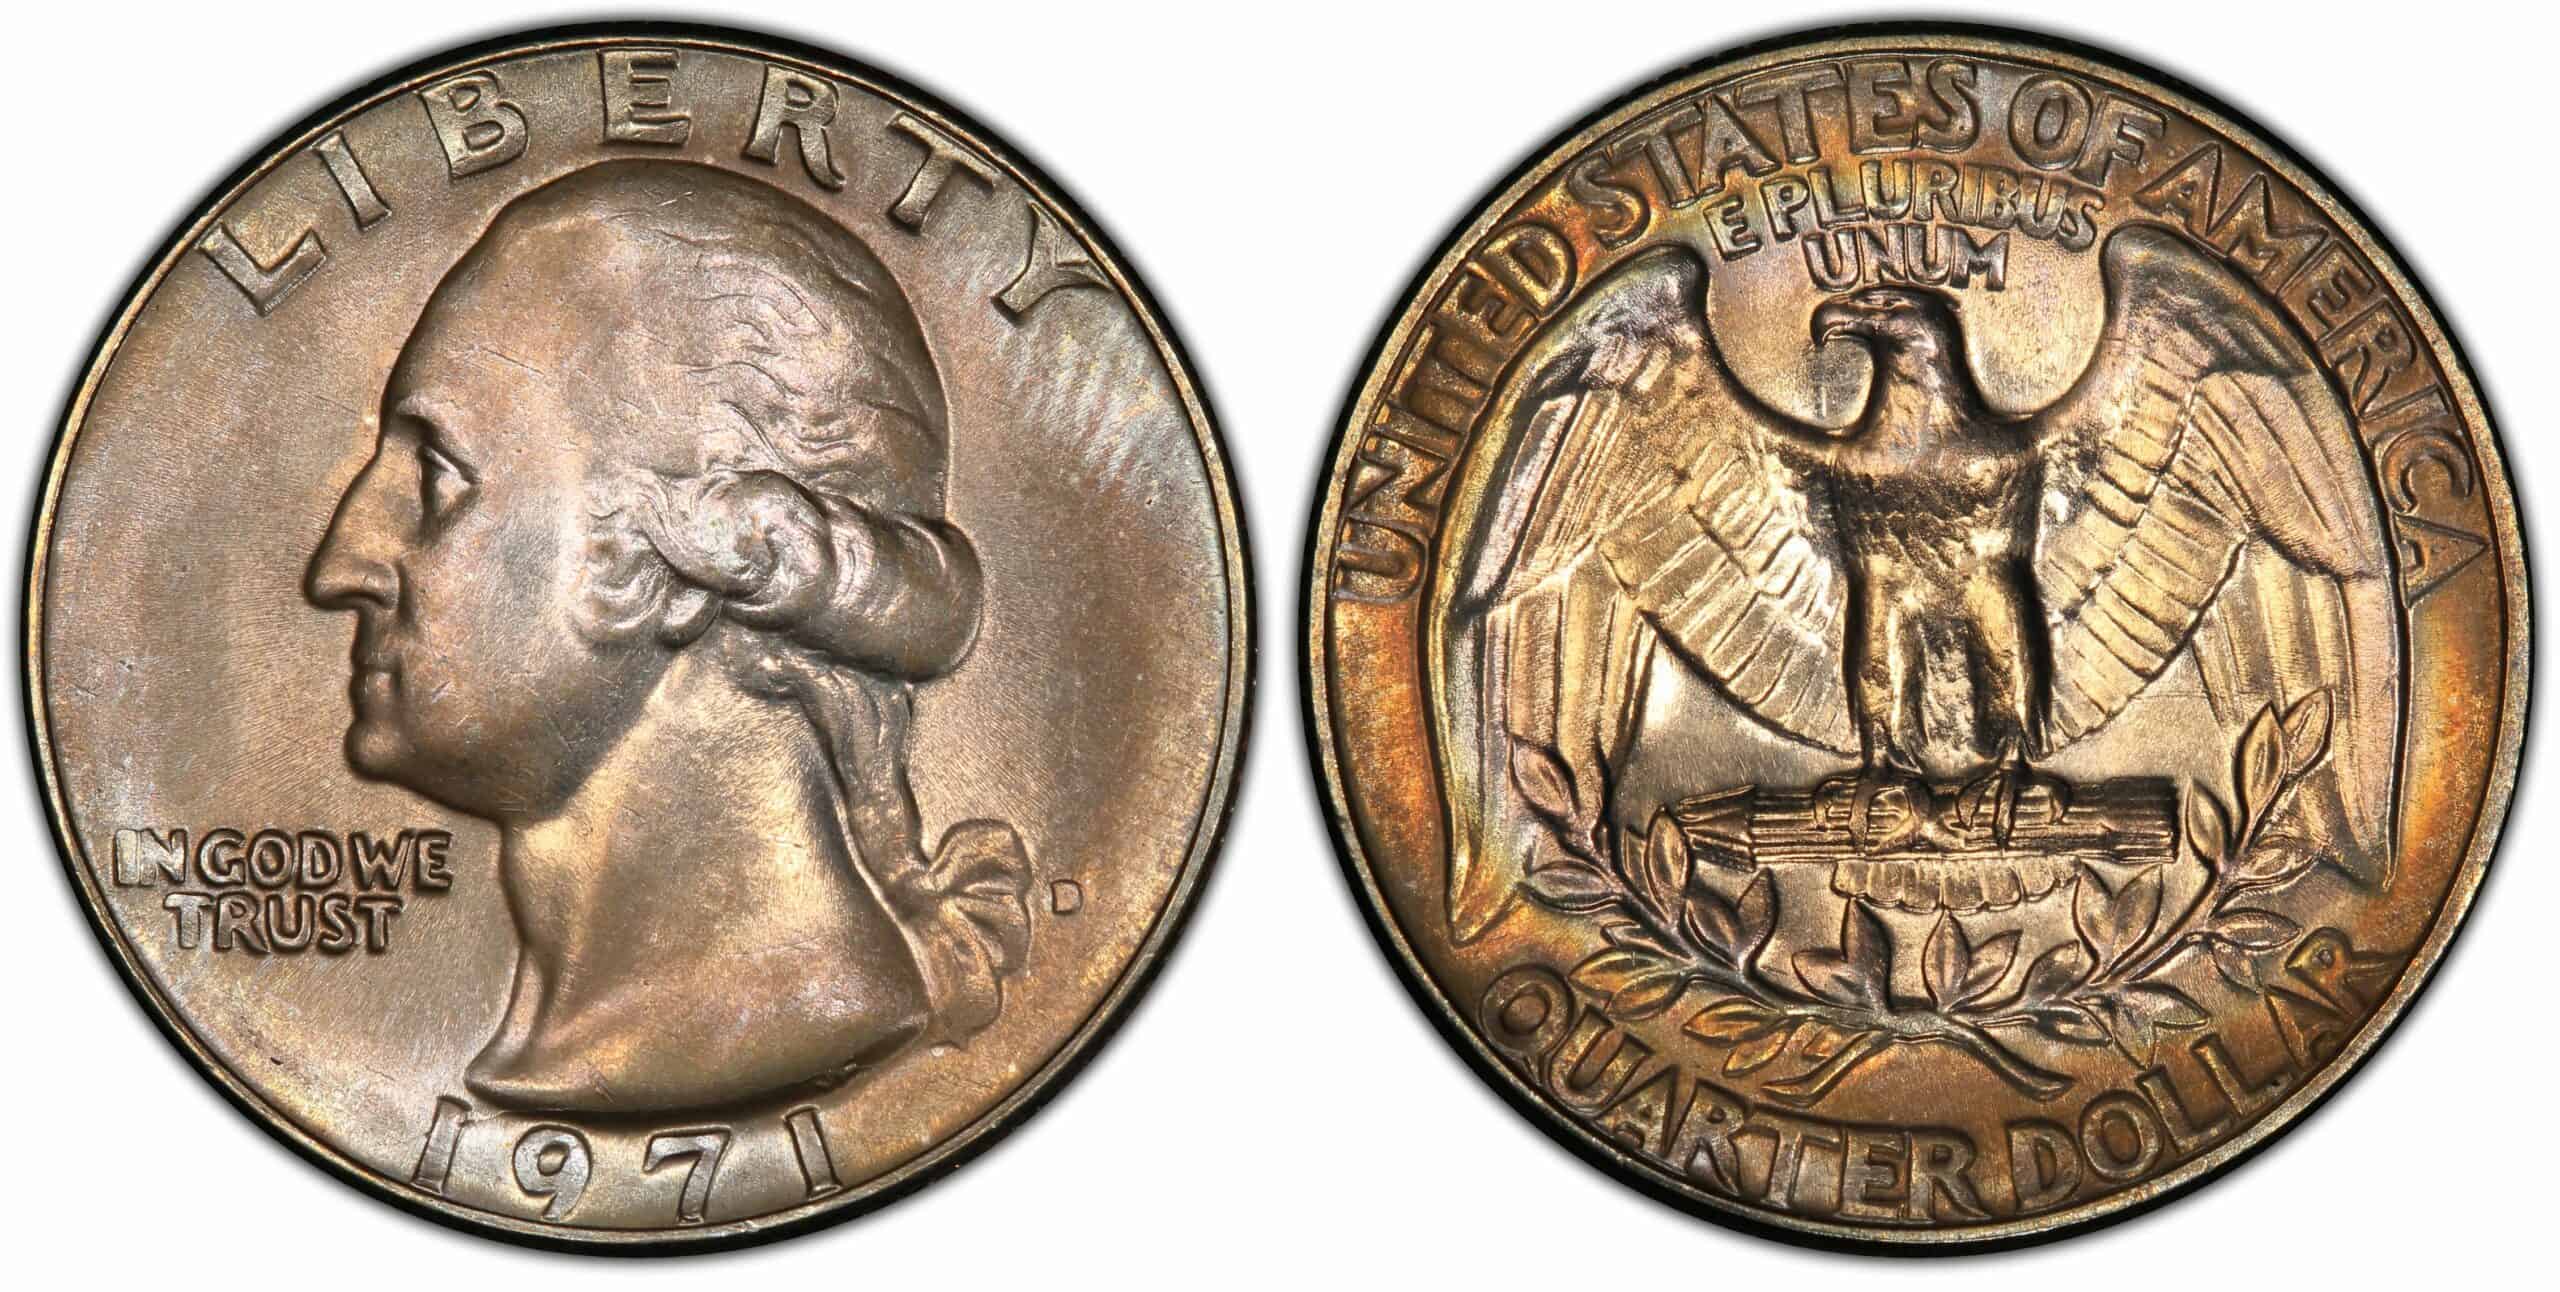 History of the 1971 Quarter